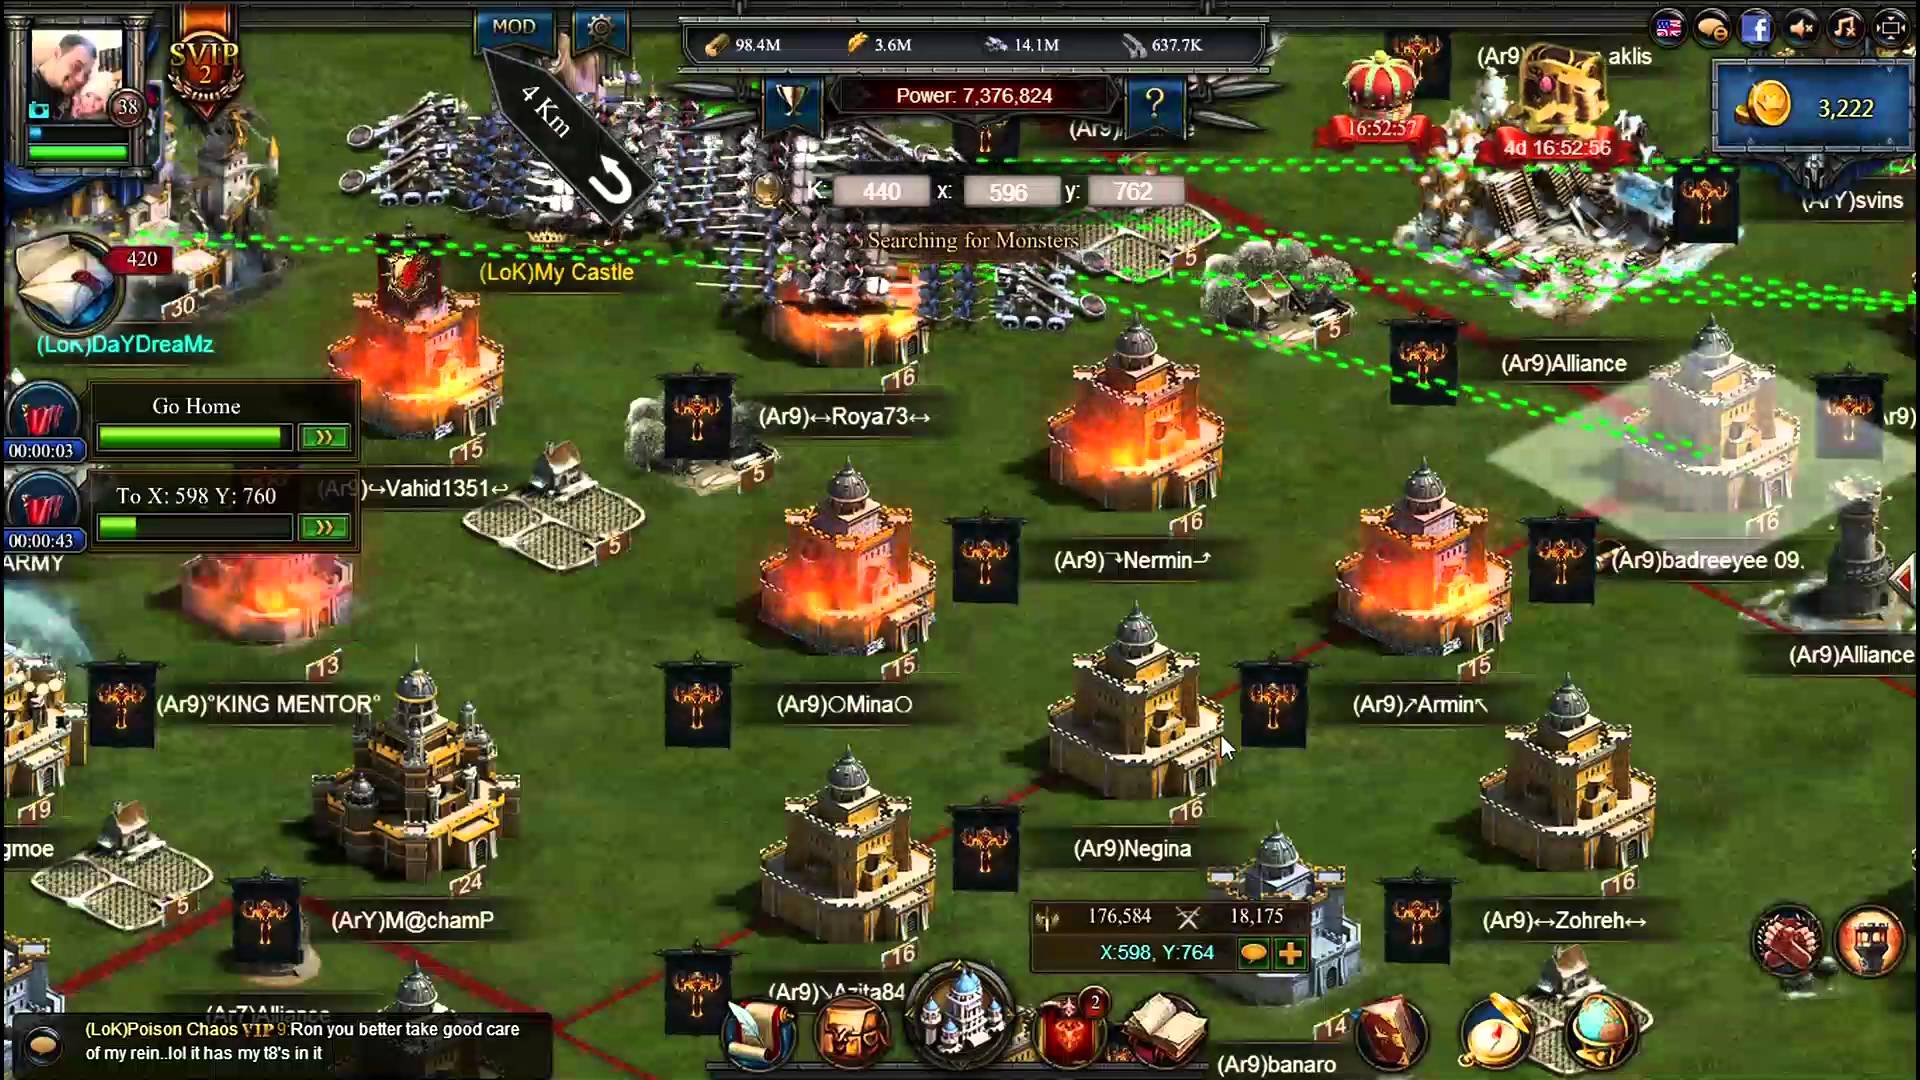 14 best Android tower defense games 